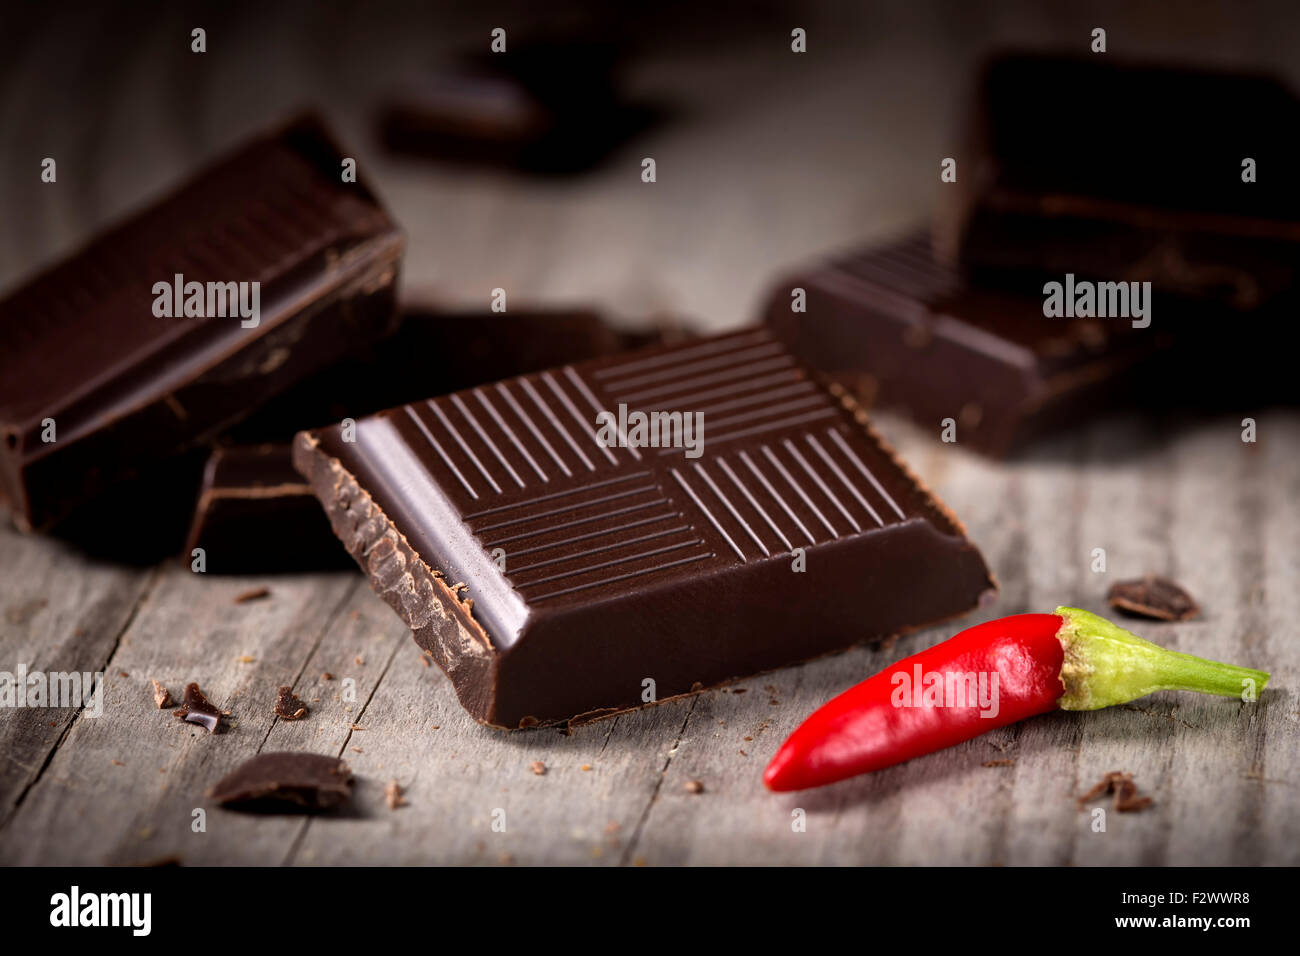 Chopped Chocolate with Red Chilli Pepper on wooden background closeup. Chunks of Broken dark chocolate bar on wood table macro. Stock Photo